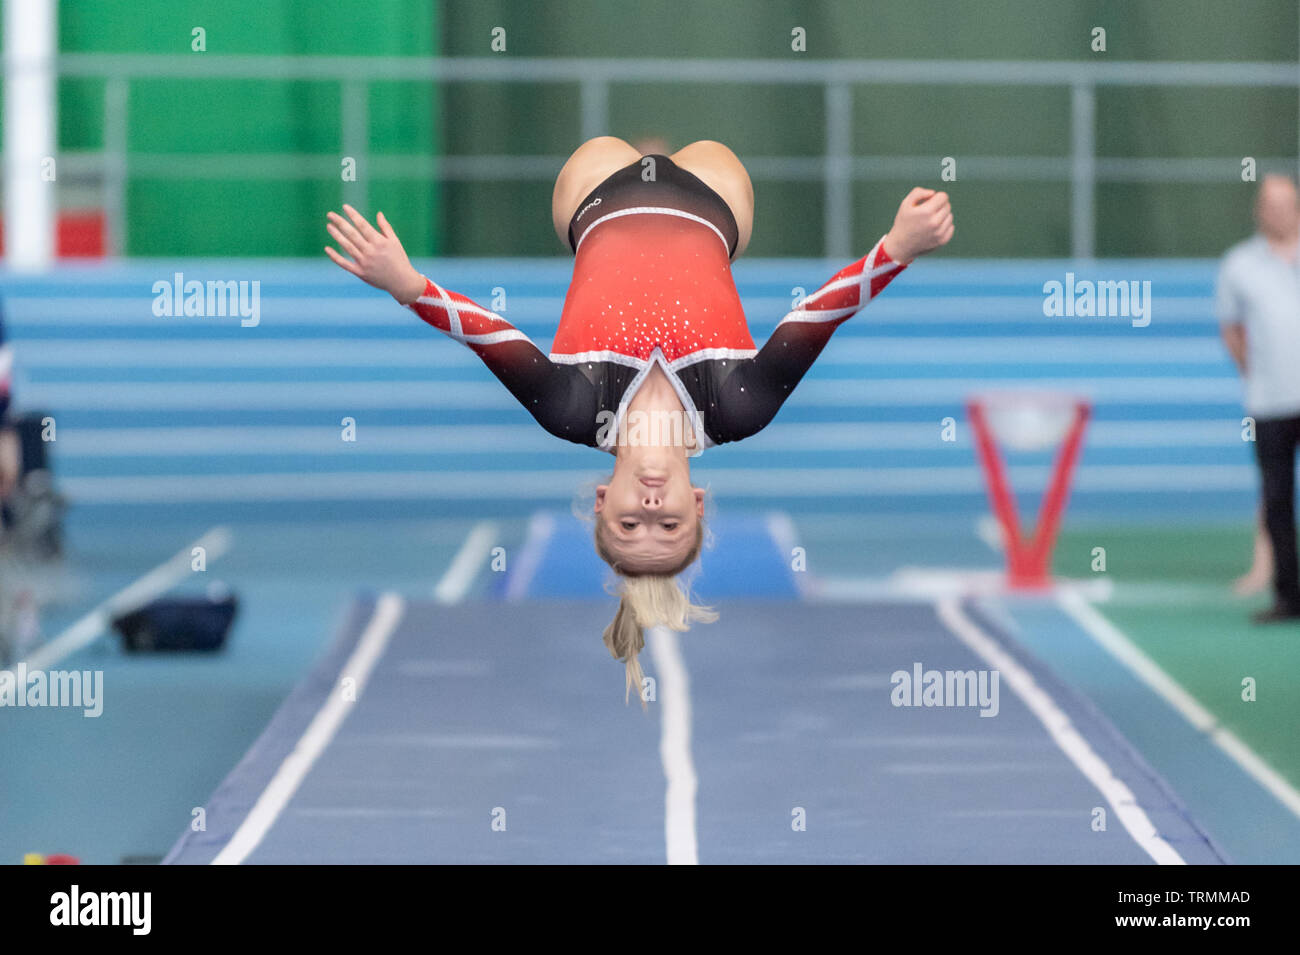 Sheffield, England, UK. 2 June 2019. Shanice Davidson from Durham City Gymnastics Club in action during Spring Series 2 at the English Institute of Sport, Sheffield, UK. Stock Photo